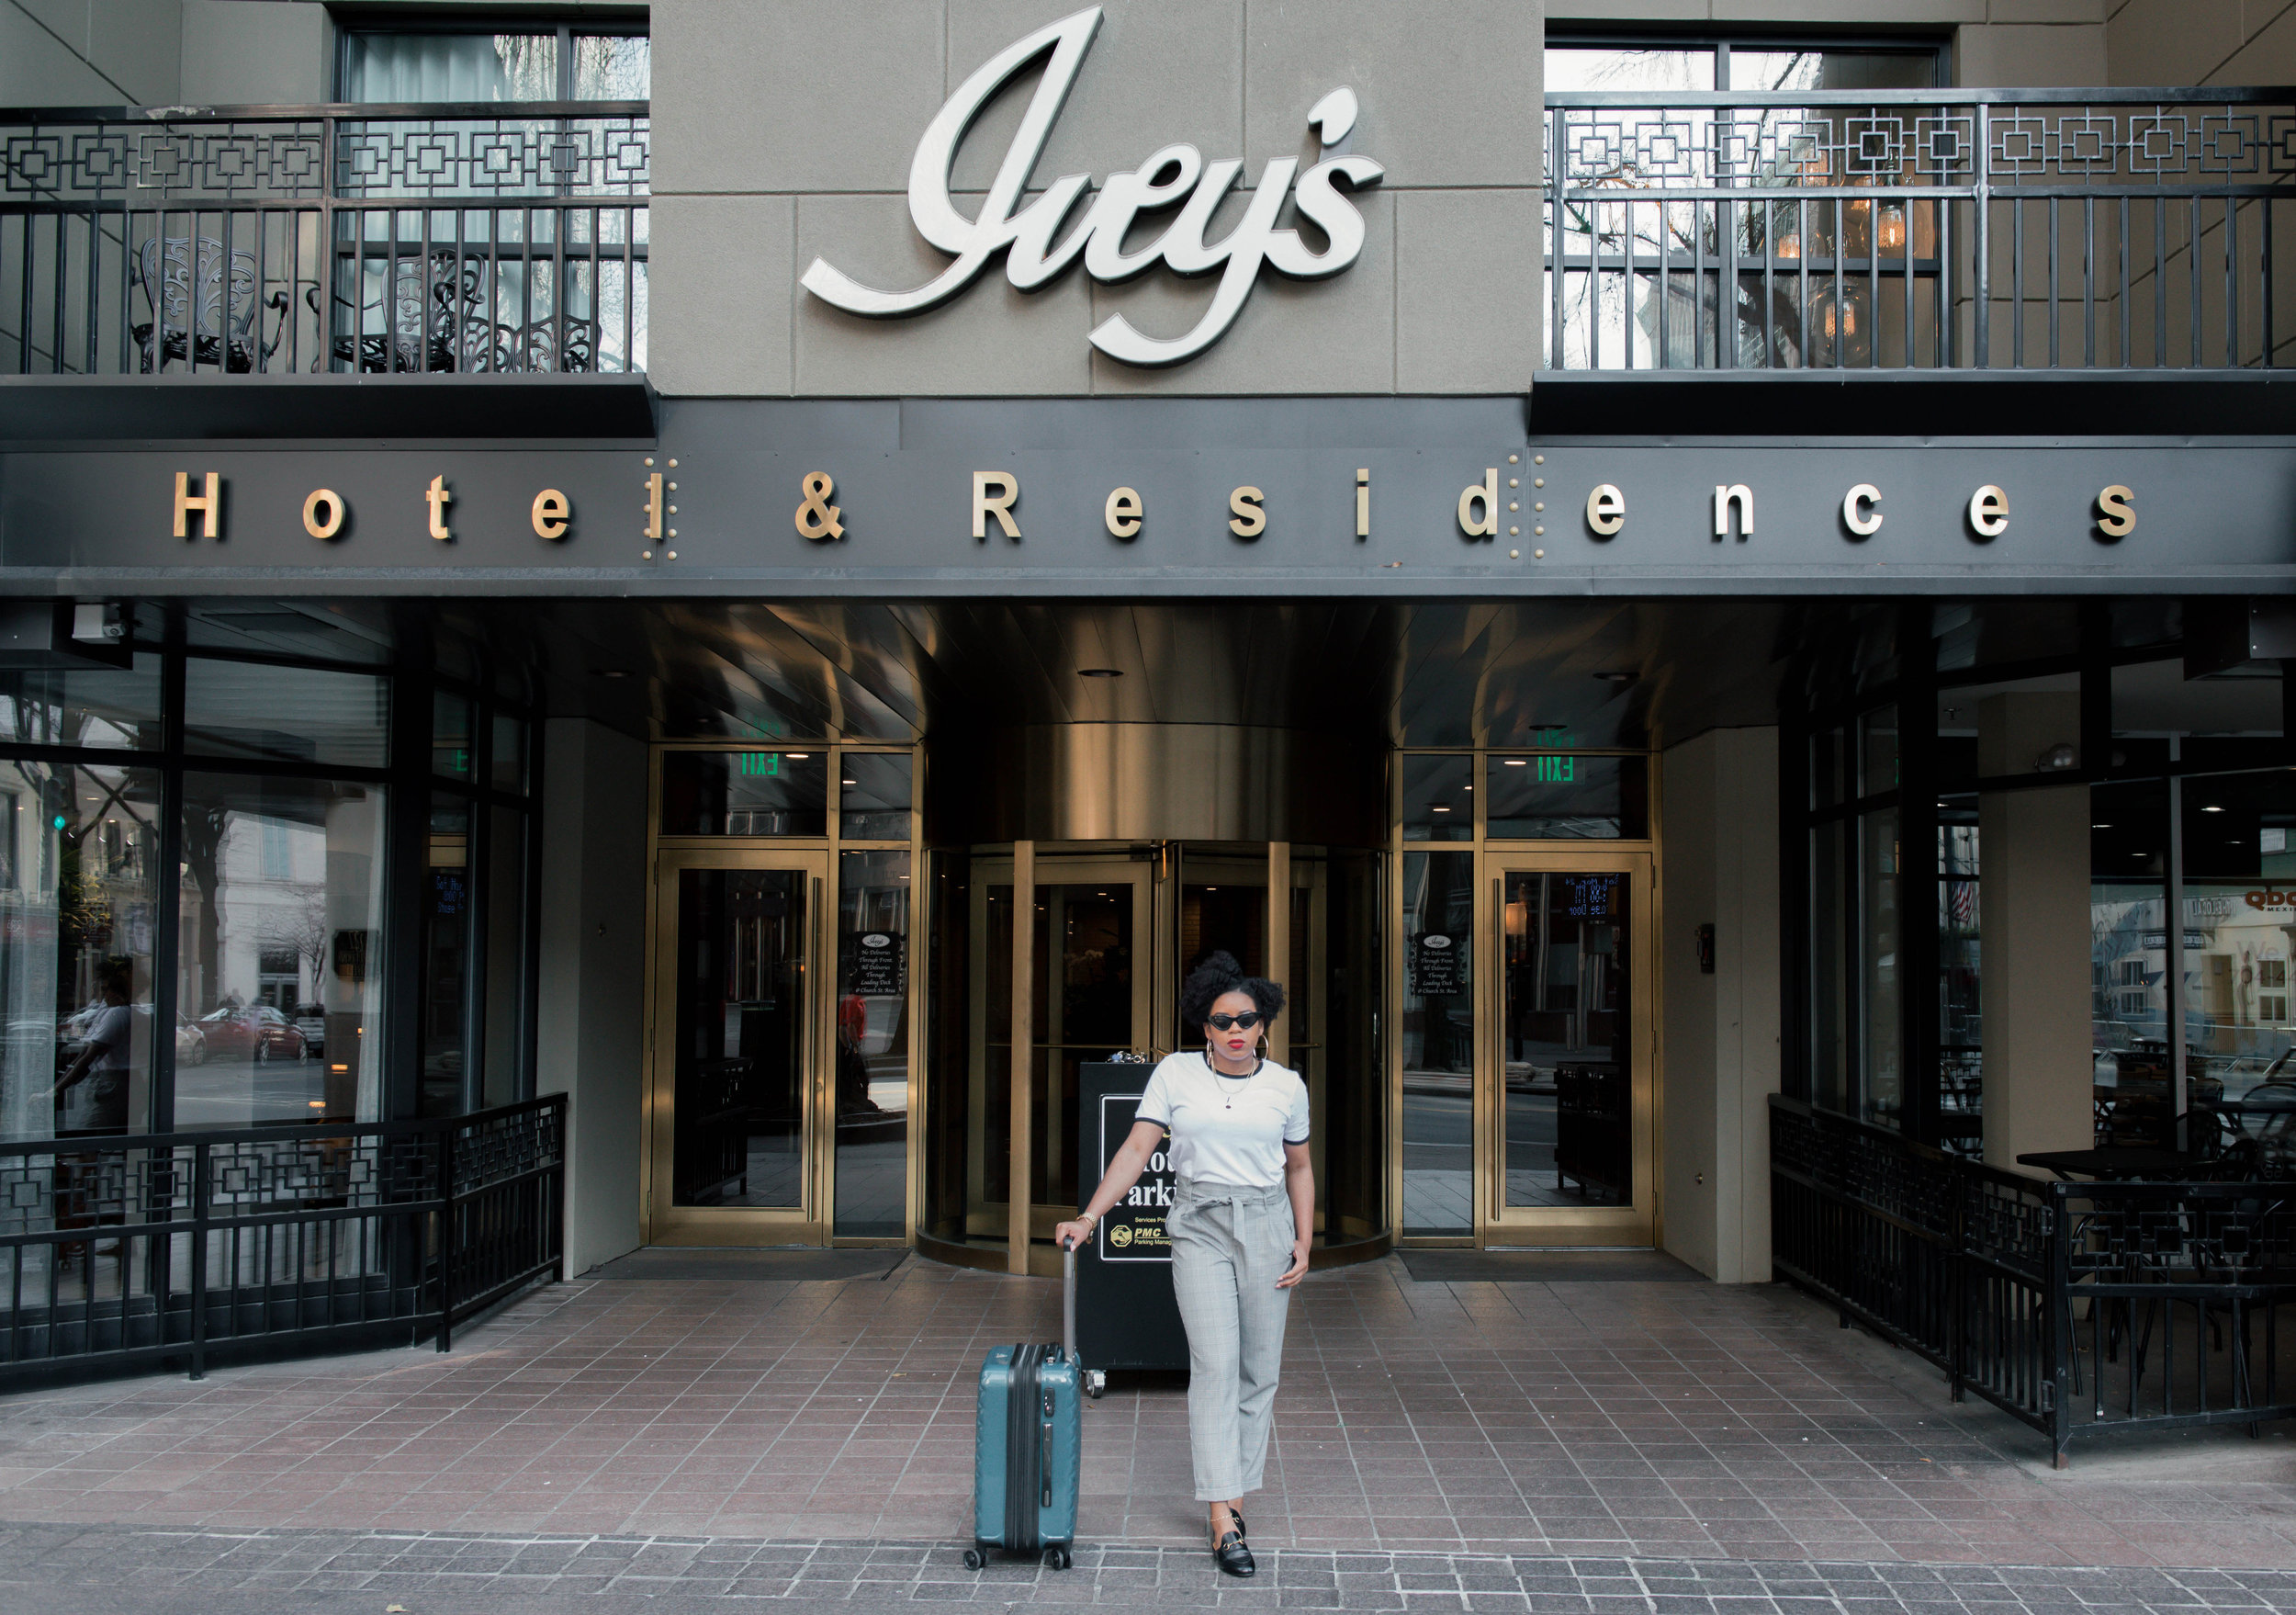 Destination: Charlotte. Staycation at The Ivey’s Hotel